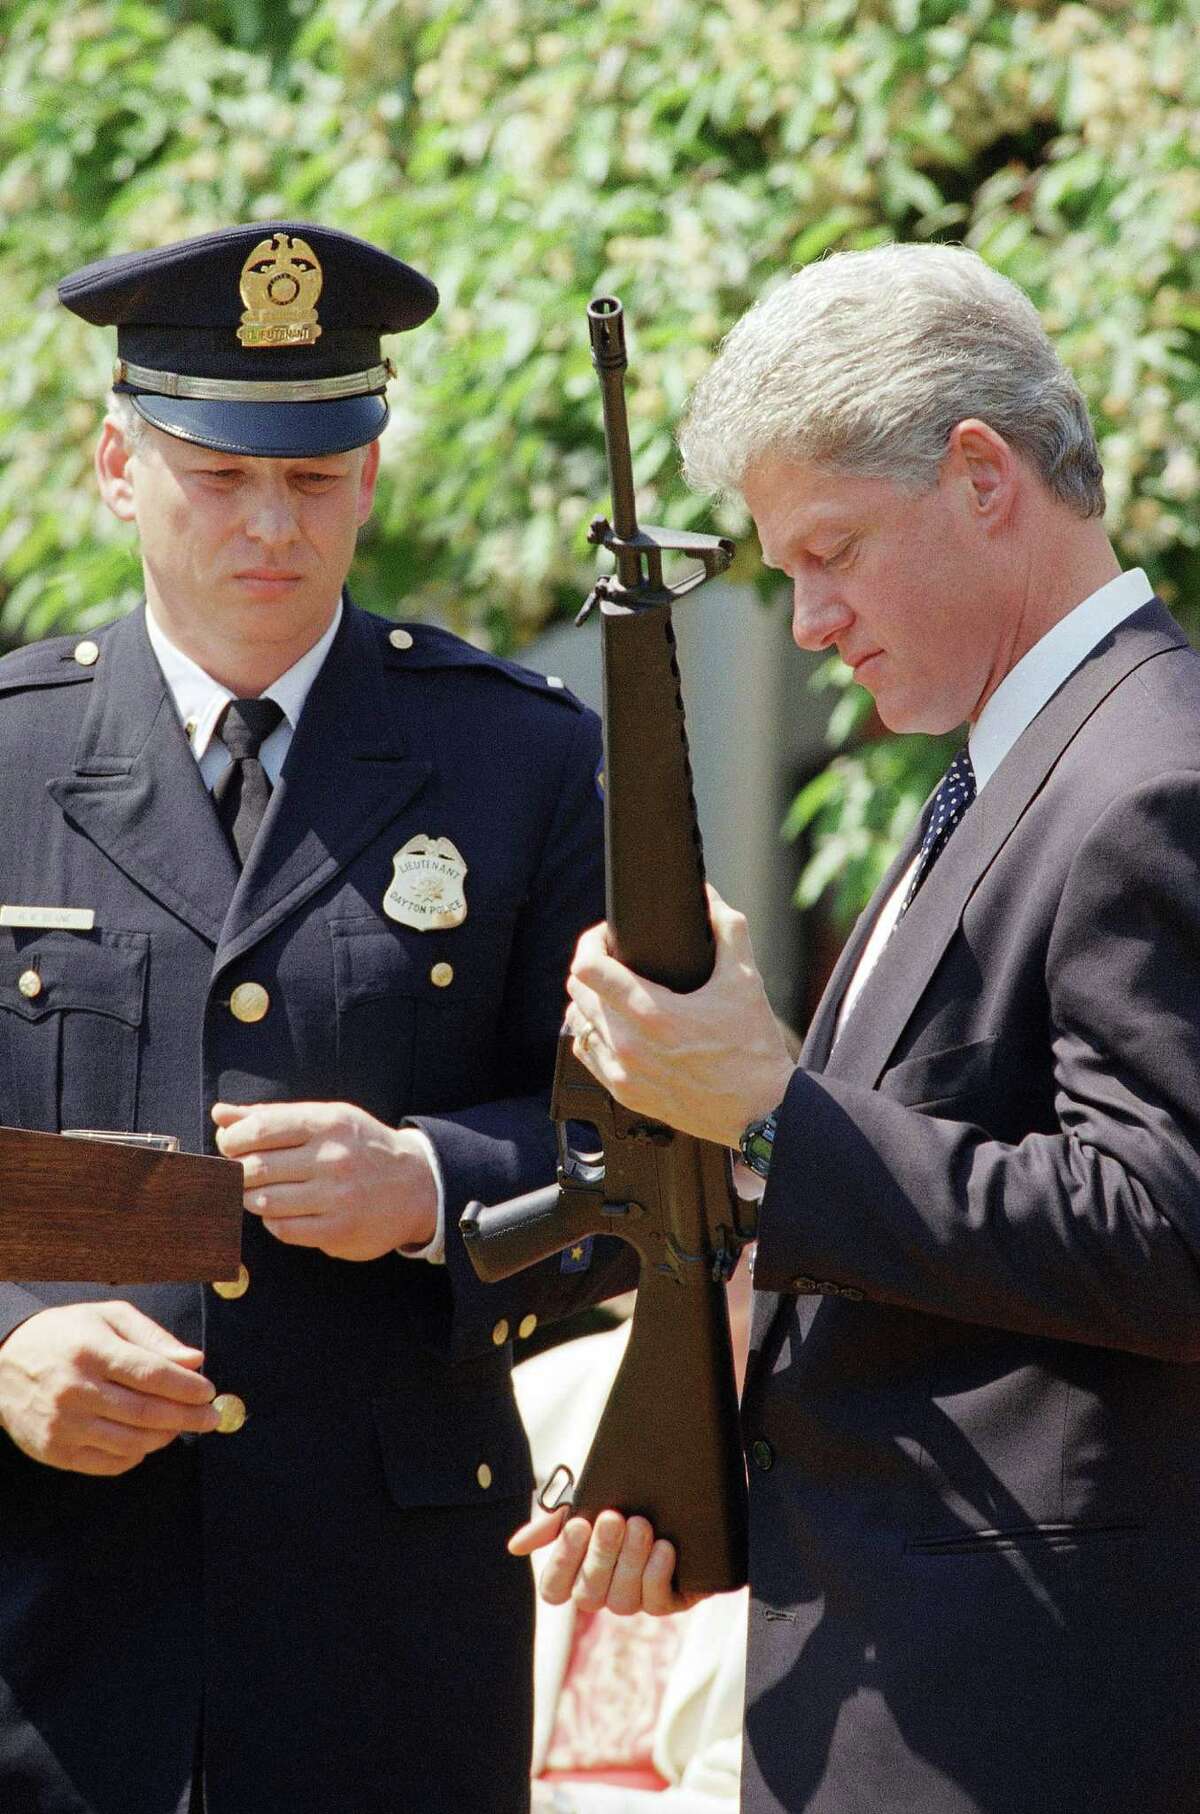 FILE - In this April 25, 1994 file photo, President Bill Clinton holds a Colt AR-15 rifle during a ceremony in the Rose Garden of the White House in Washington, where he launched efforts to pass the assault weapons ban. Dayton, Ohio Police Lt. Randy Bean, whose fellow officer Steve Whalen was gunned down with an AR-15 in 1991, looks on at left. The White House has released a photo of President Barack Obama firing a gun, two days before he is set to travel to Minnesota to discuss gun control. It shows Obama shooting at clay targets on the range at Camp David, the presidential retreat in Maryland, where he says he engages in the sport "all the time." The image was released at a time when Obama is pushing a package of gun-control measures in response to the Newtown, Conn., school shooting. But the image of a U.S. president holding a gun is certainly nothing new. (AP Photo/Dennis Cook, File)